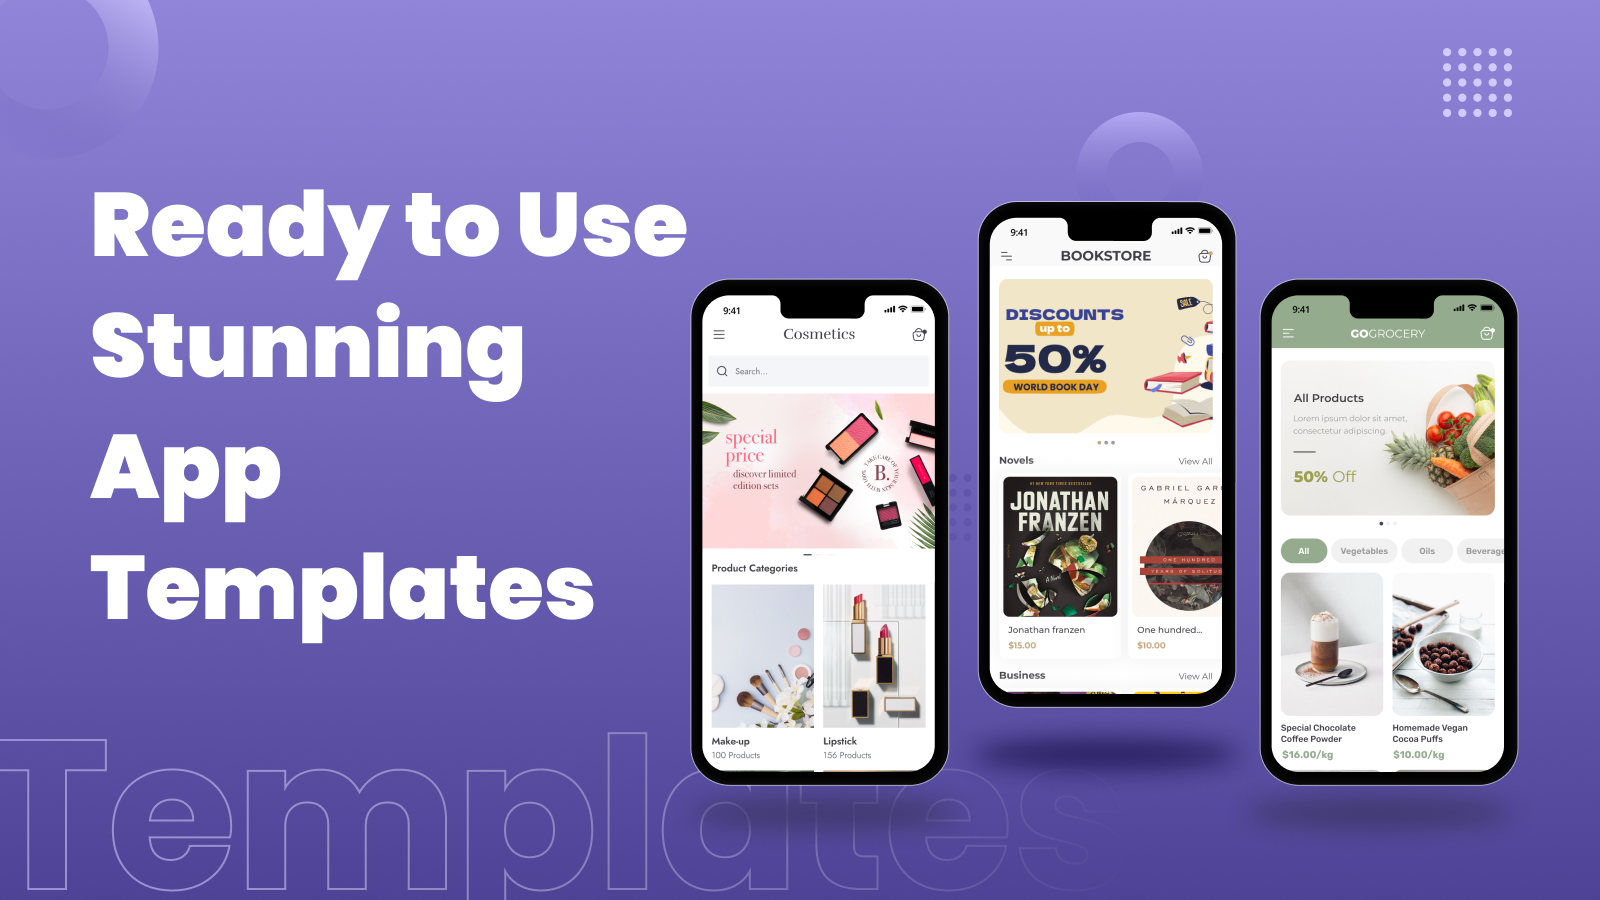 Ready to use stunning app templates